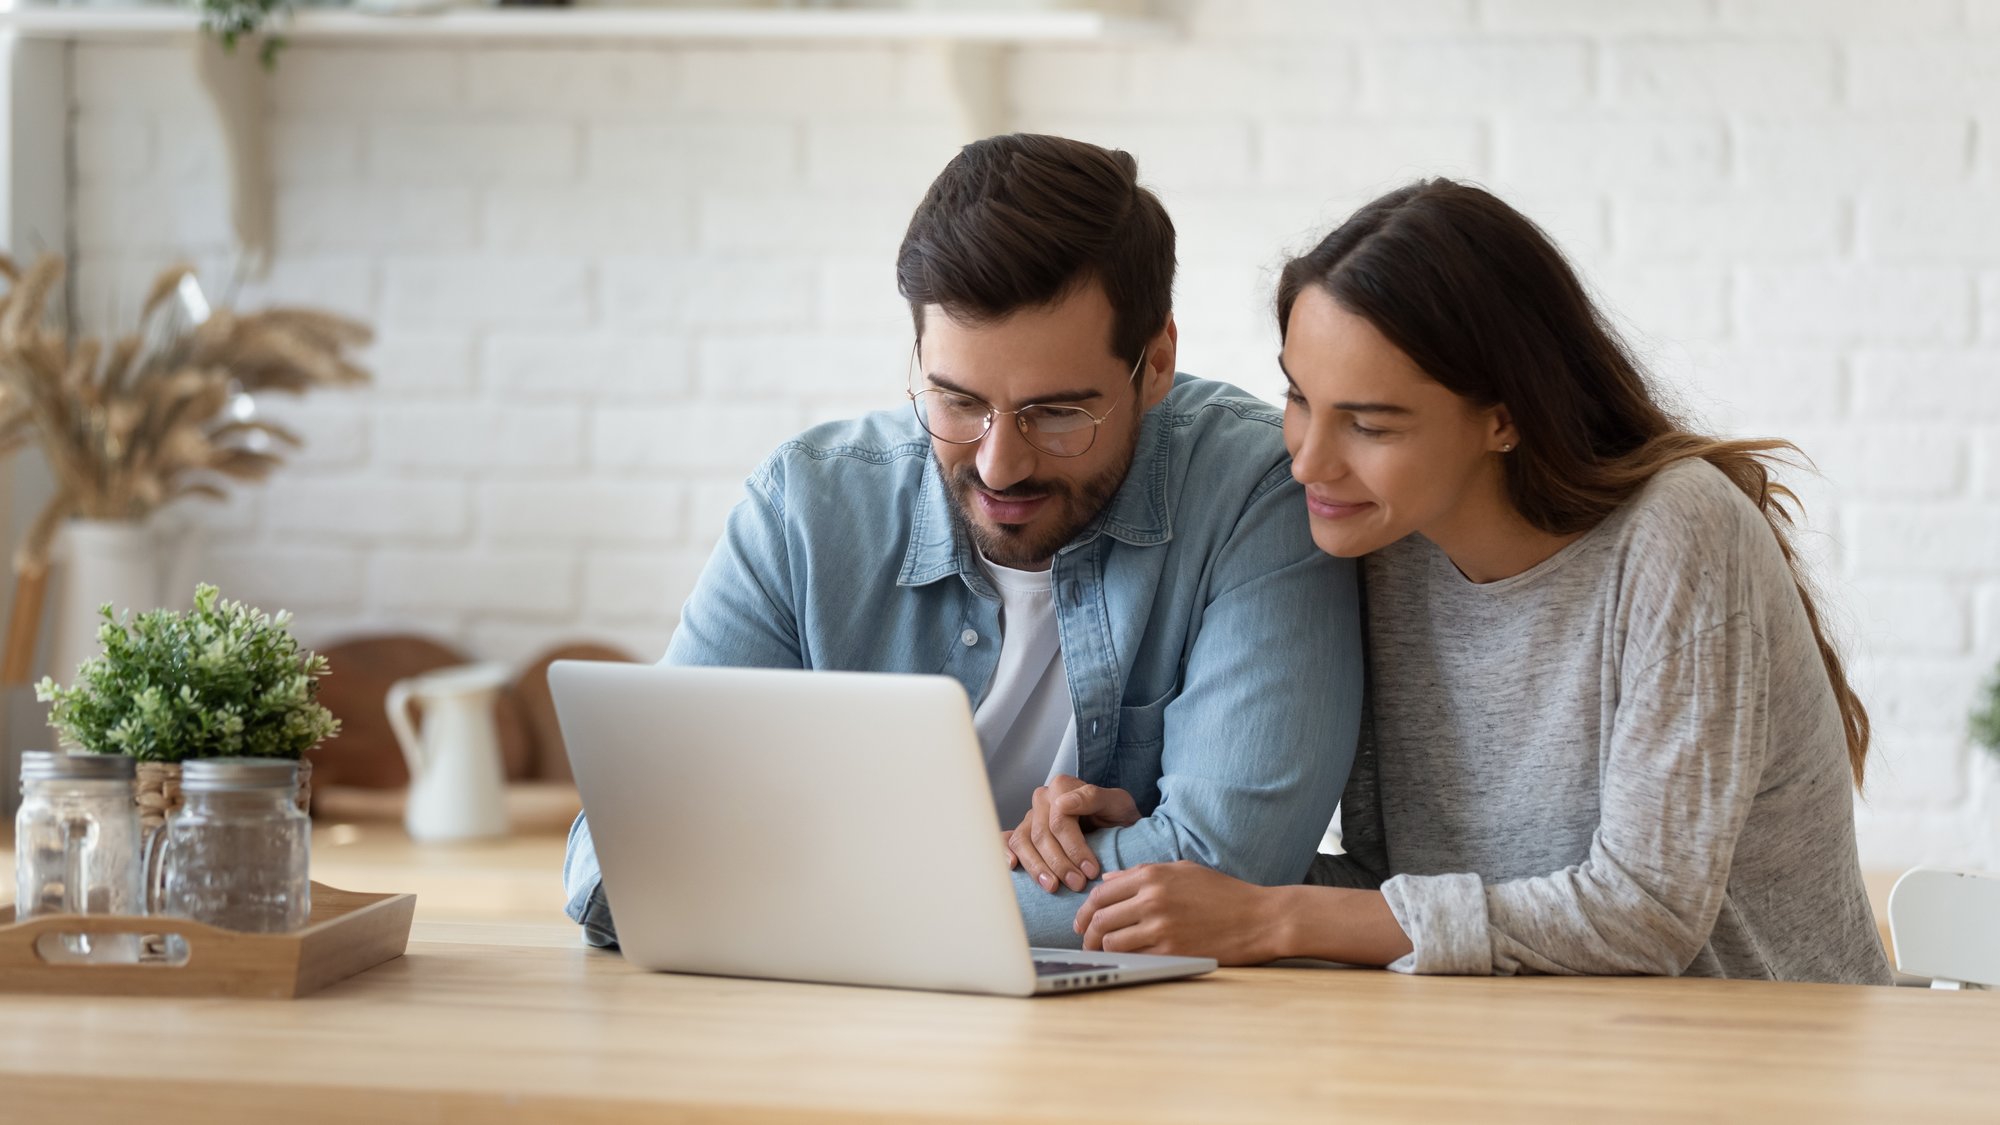 Man and woman looking at computer together and online shopping